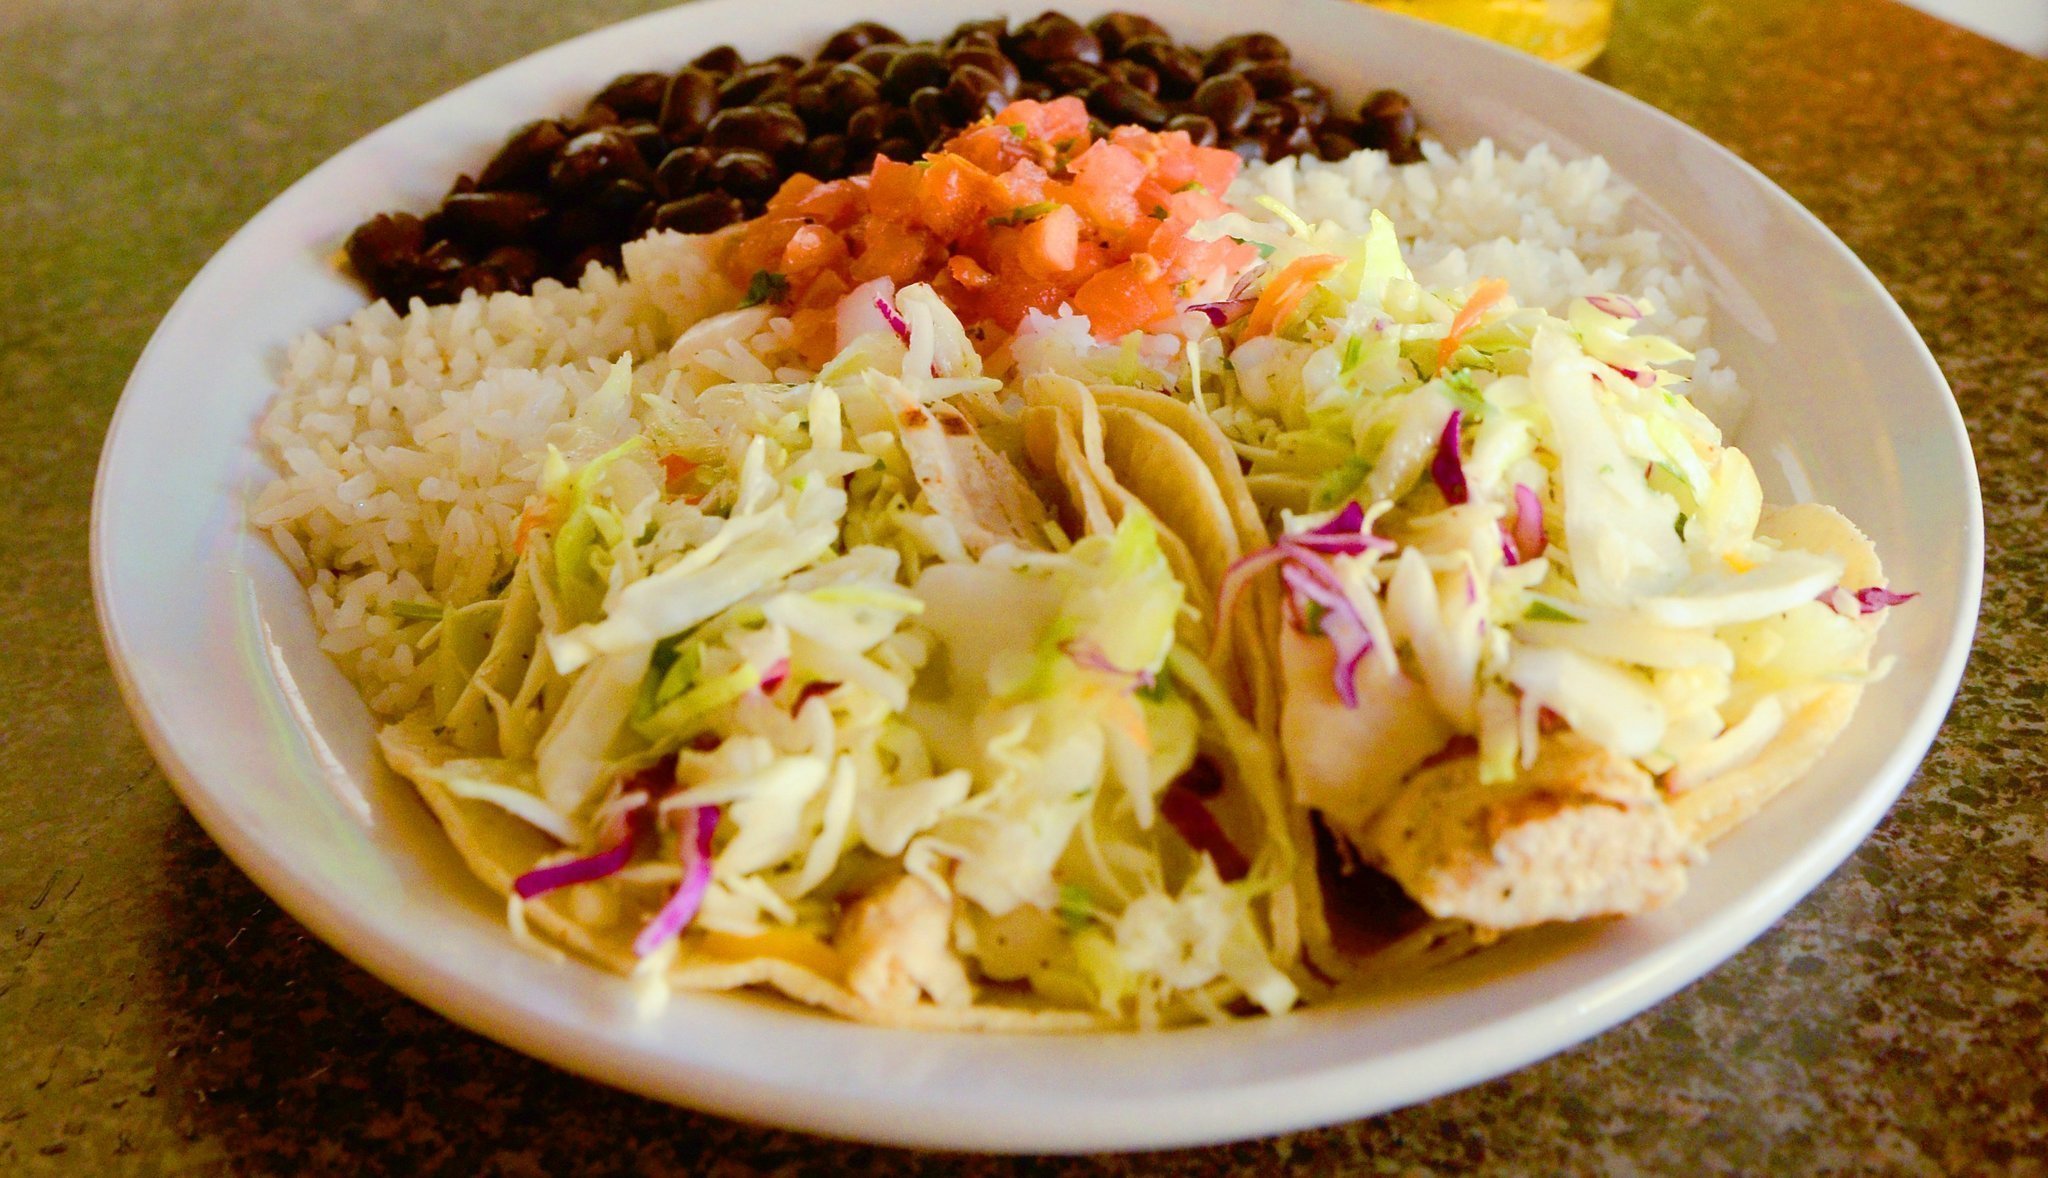 Wahoo’s offers fish tacos and a whole lot more in La Jolla